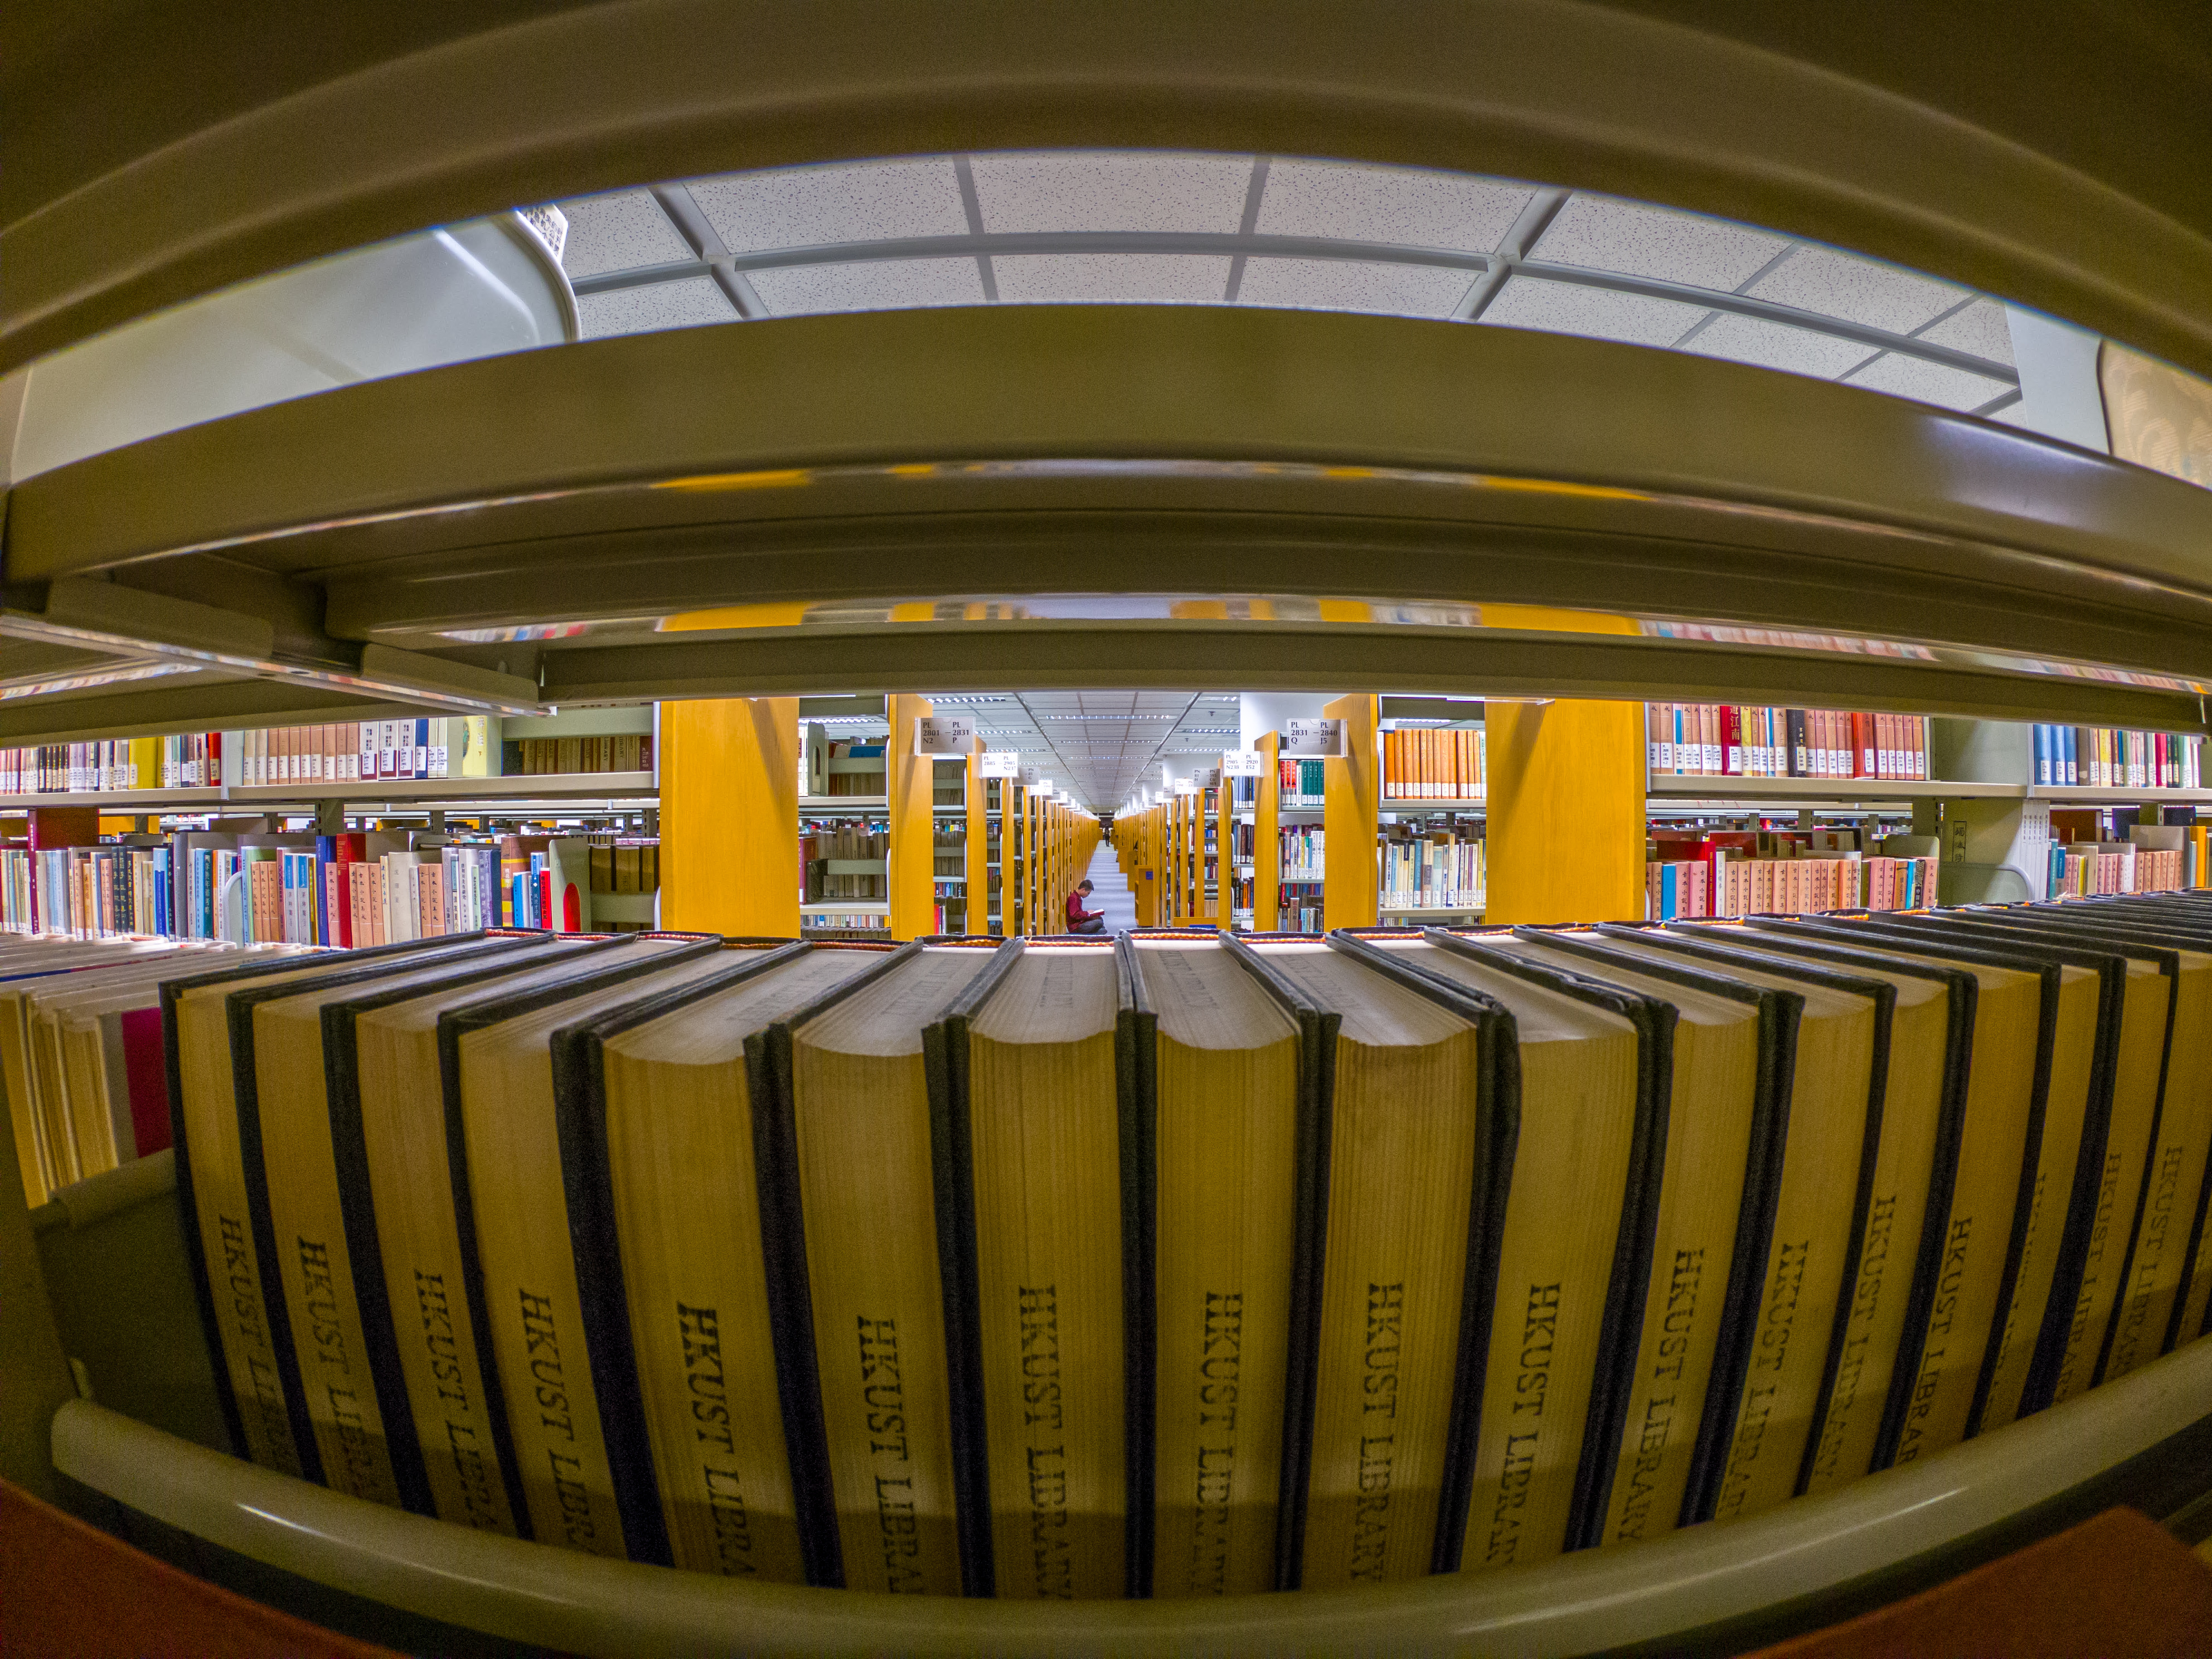 1st Runner up: If Books Have Eyes at HKUST Library by Ben Xu (ECE)